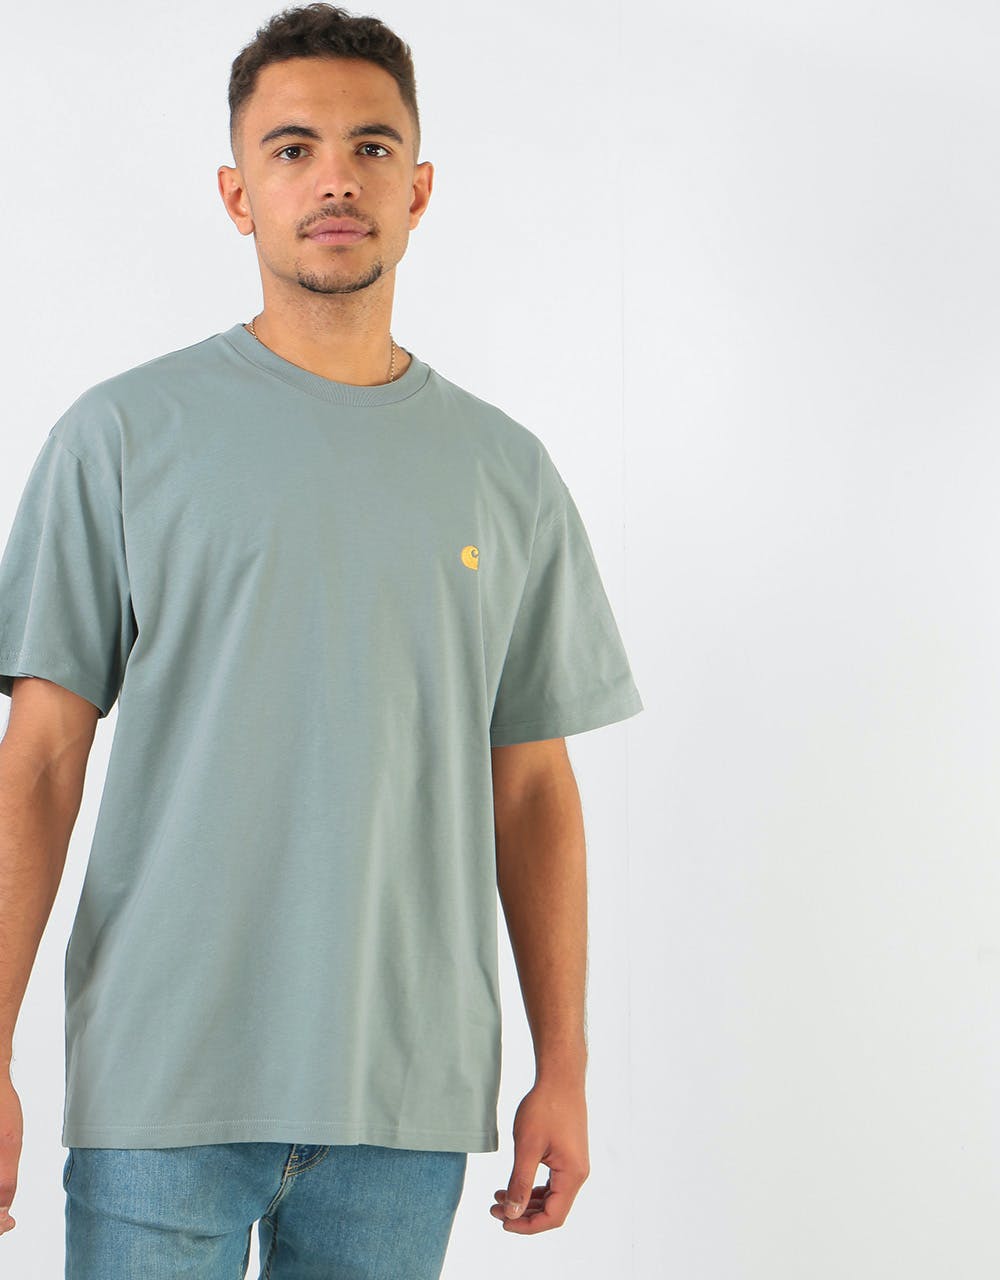 Carhartt WIP S/S Chase T-Shirt - Cloudy/Gold